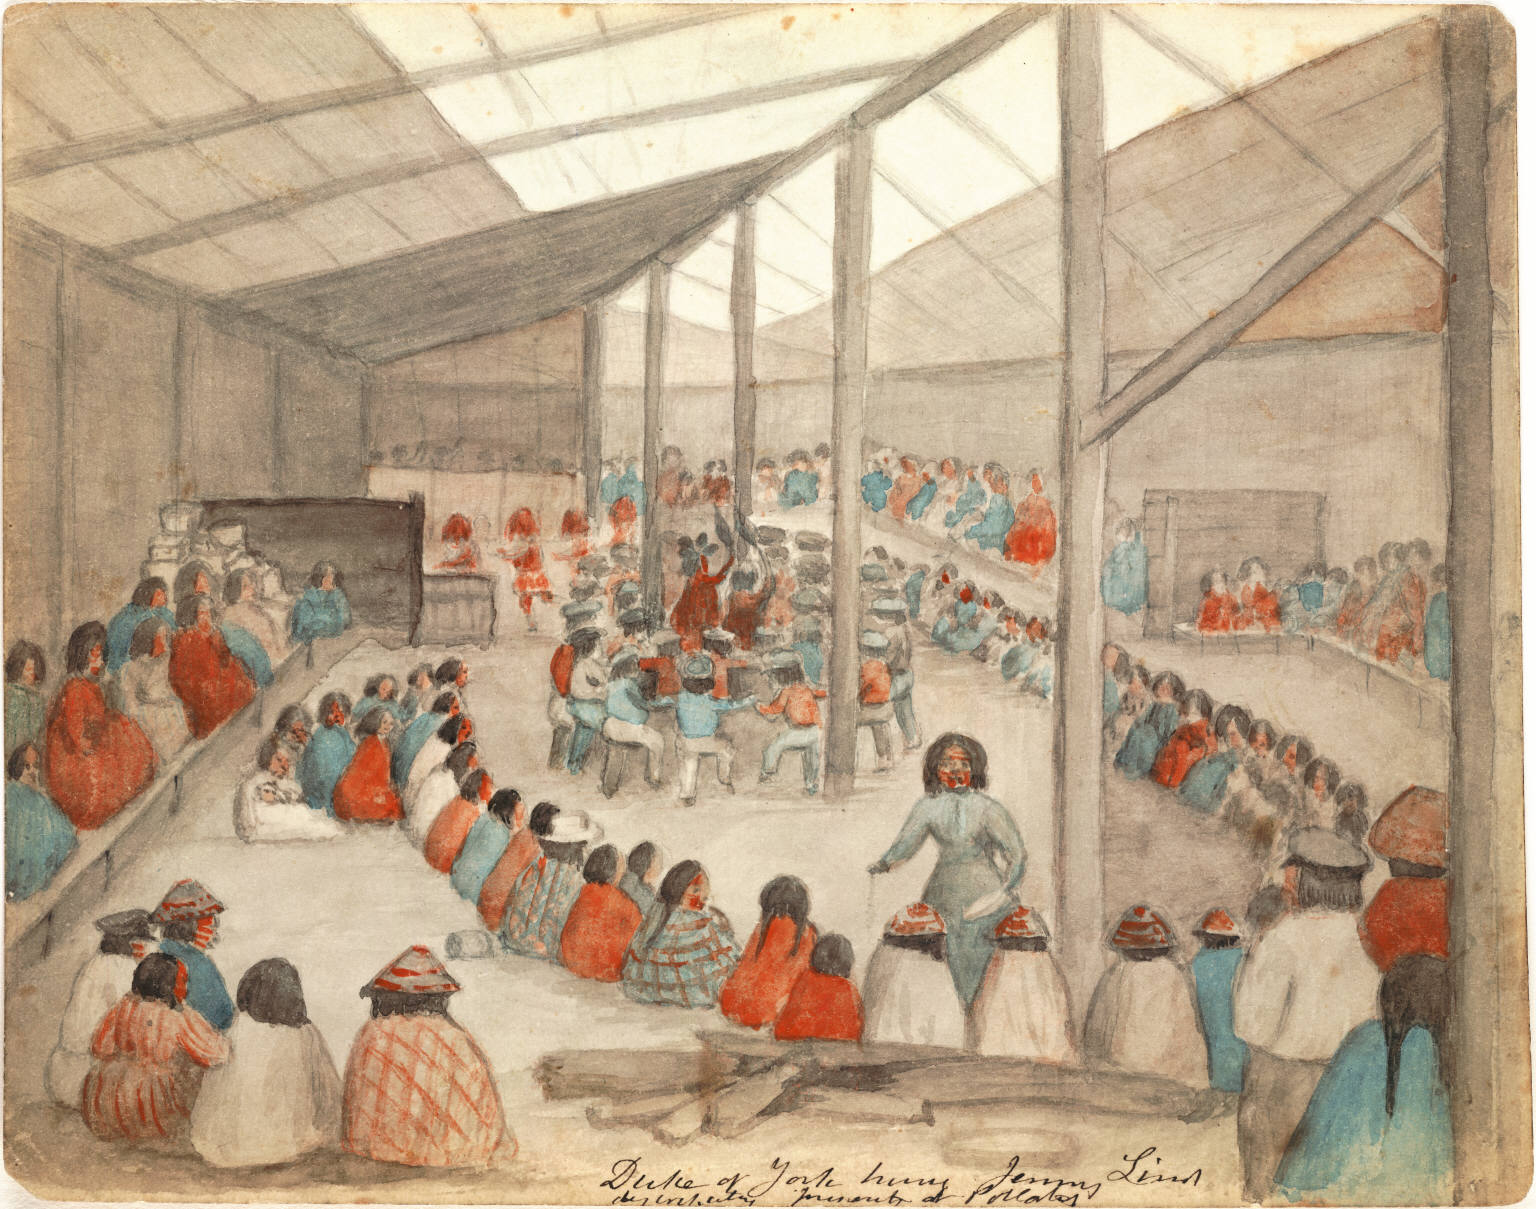 a watercolor of a potlatch. People are gathered in a large building with wooden beams down the center. People are sitting in a circle surrounding a group of people dancing. People are wearing red-orange and light blue clothing.